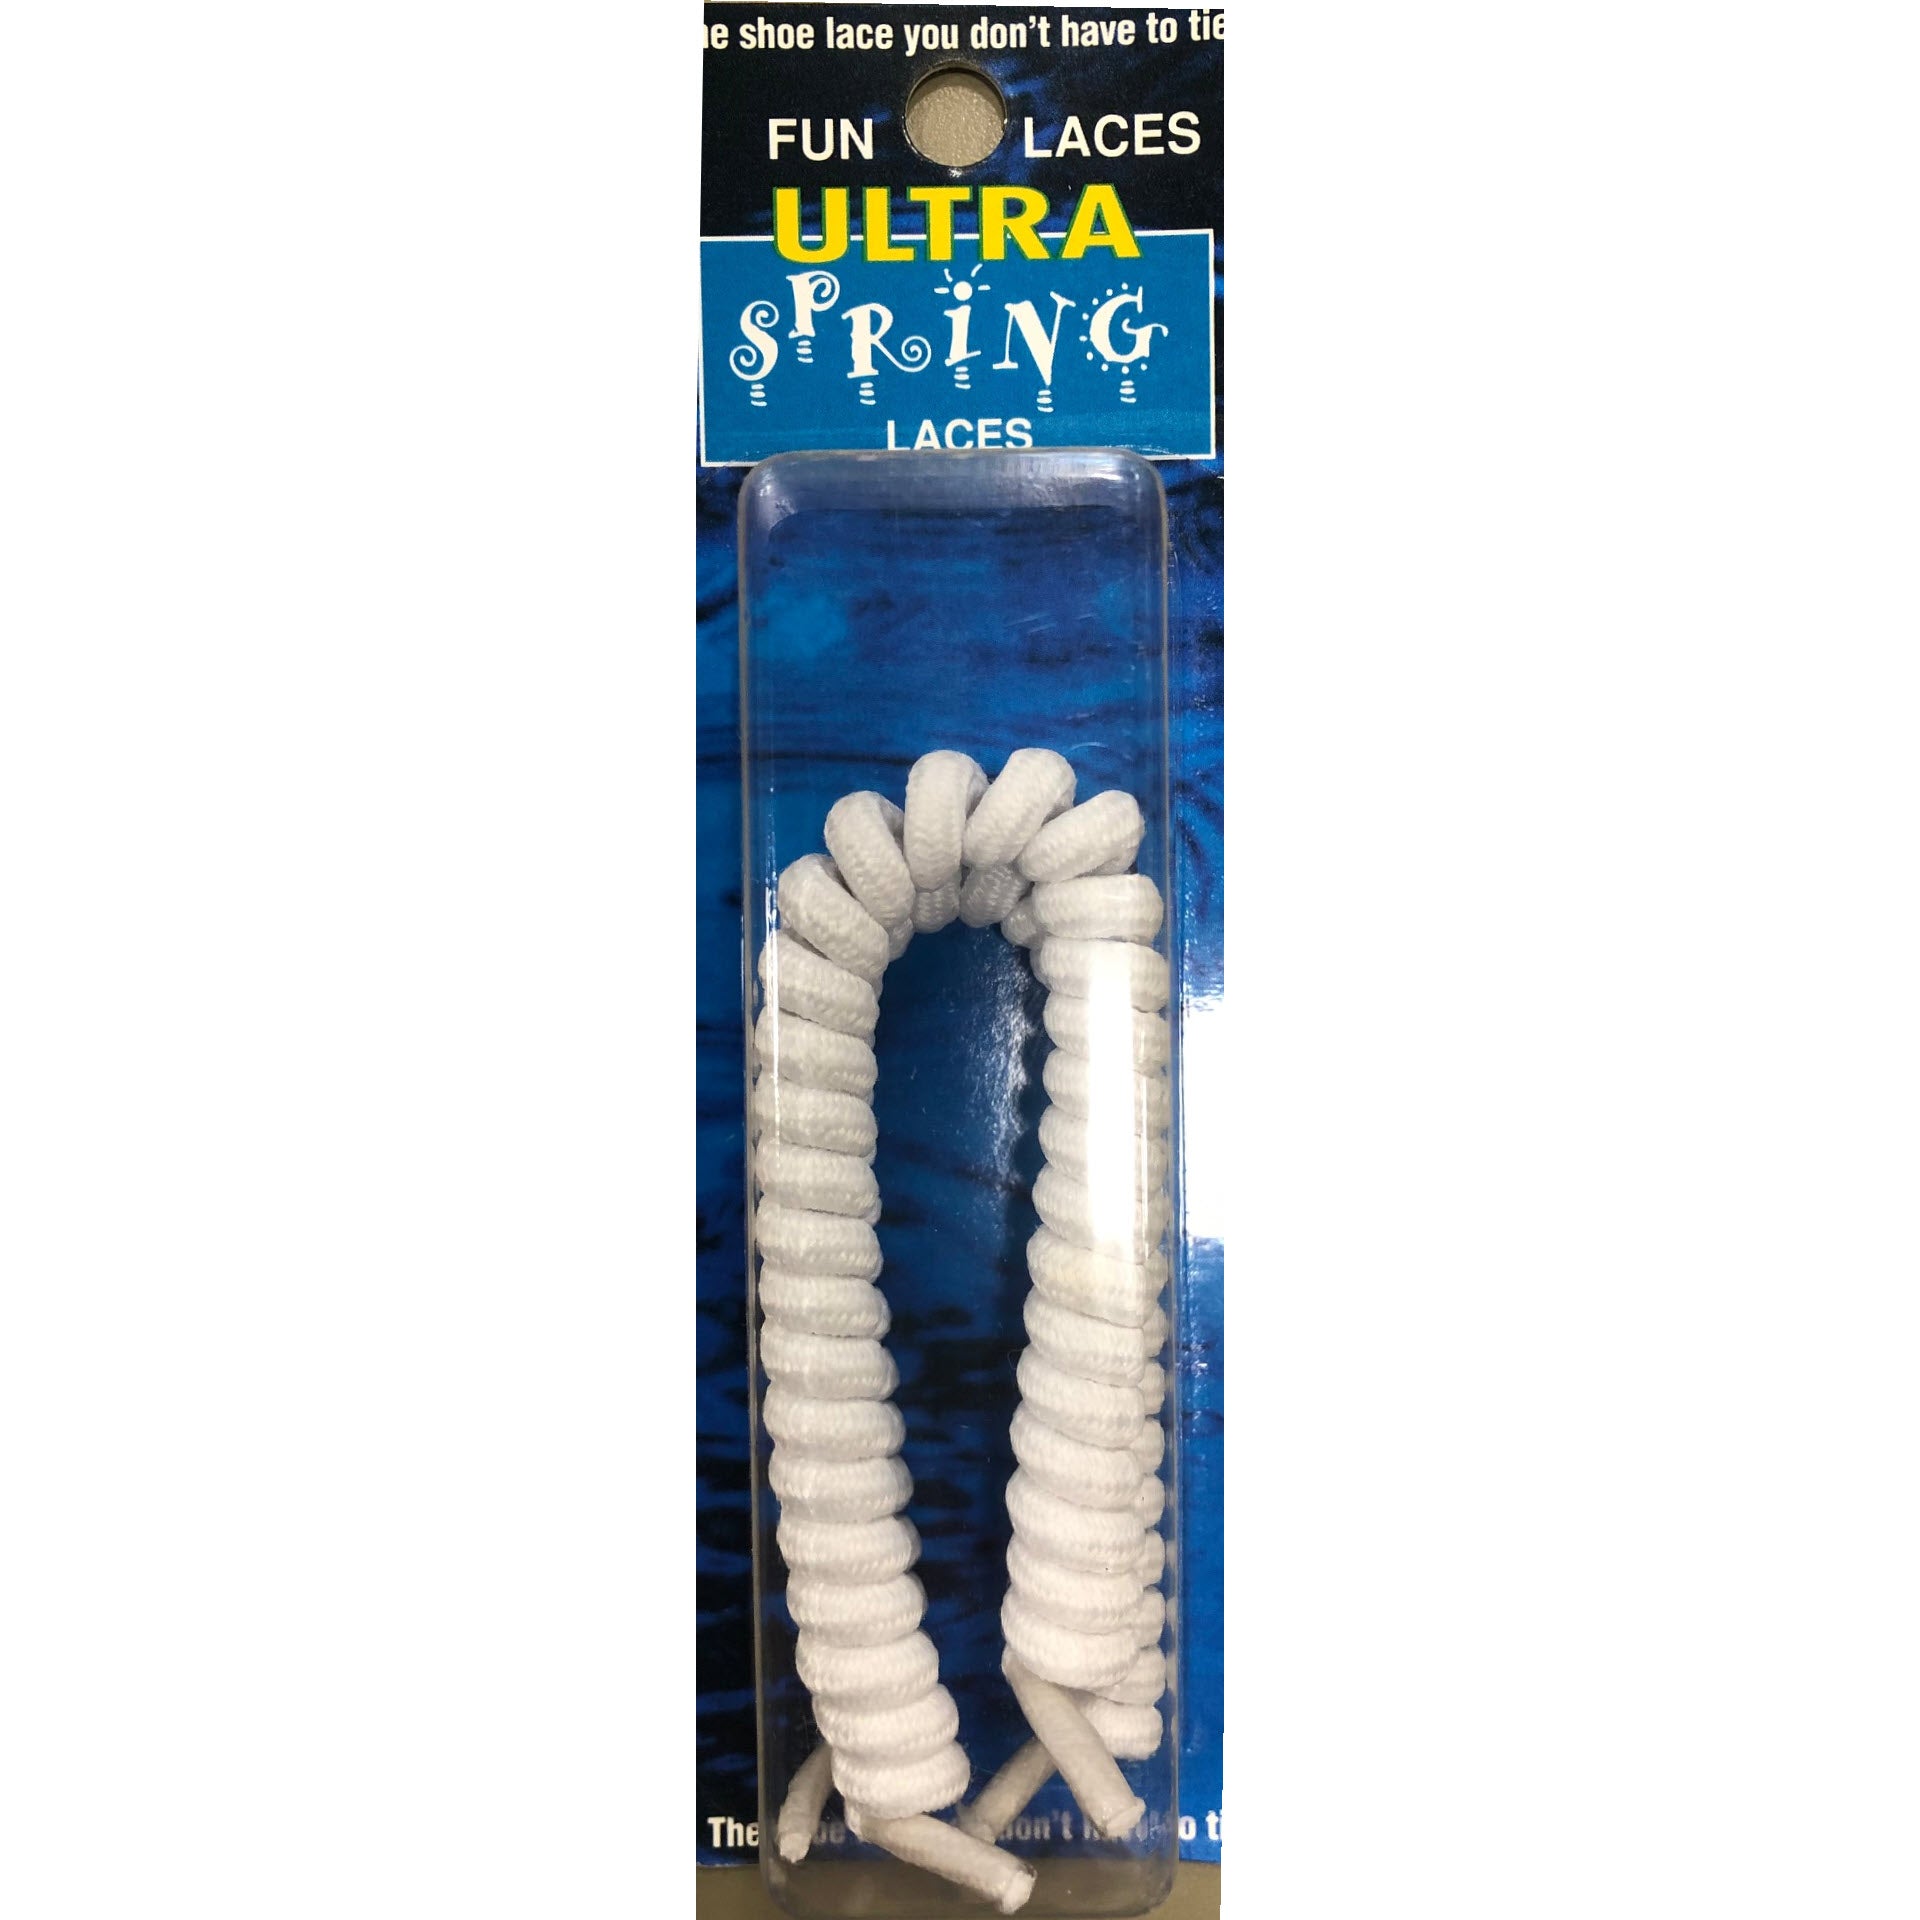 Packaging of a pair of white FRANKFORD LEATHER PACKAGED SPRINGS LACES advertised as "fun laces" that do not require tying.